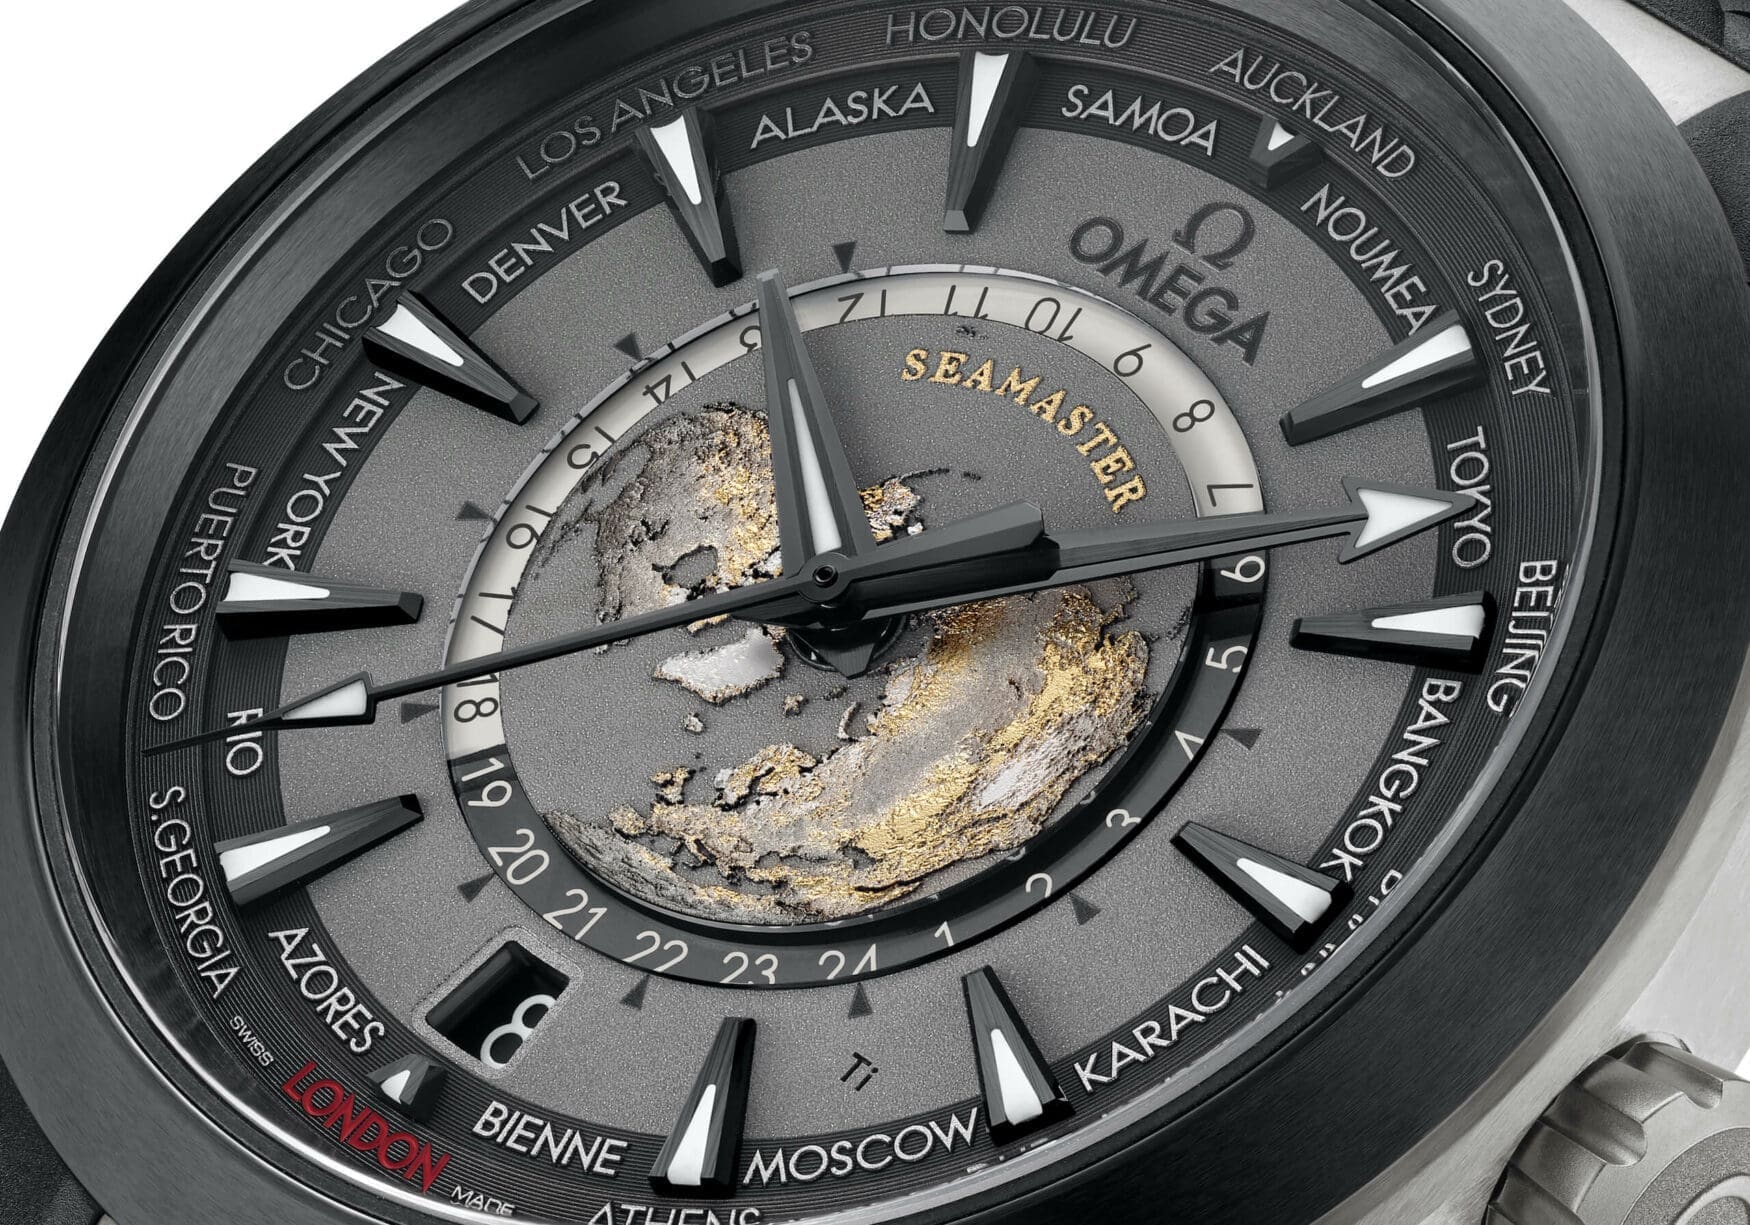 Omega revisits the Seamaster Aqua Terra Worldtimer with new titanium and steel models with coloured ceramic bezels